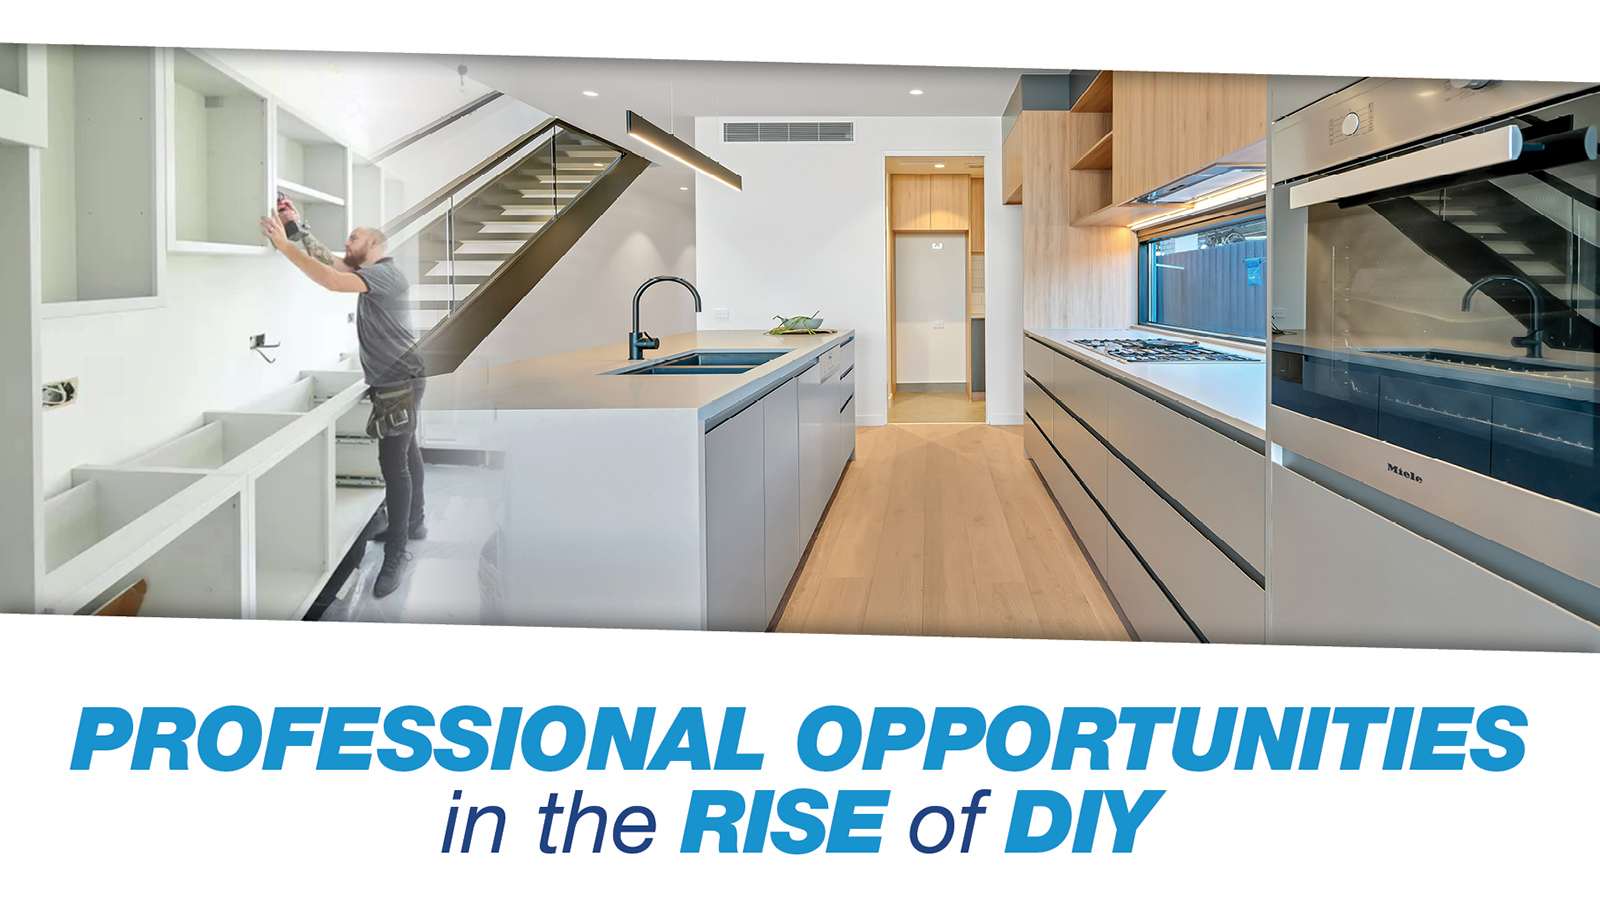 Professional opportunities in the rise of DIY